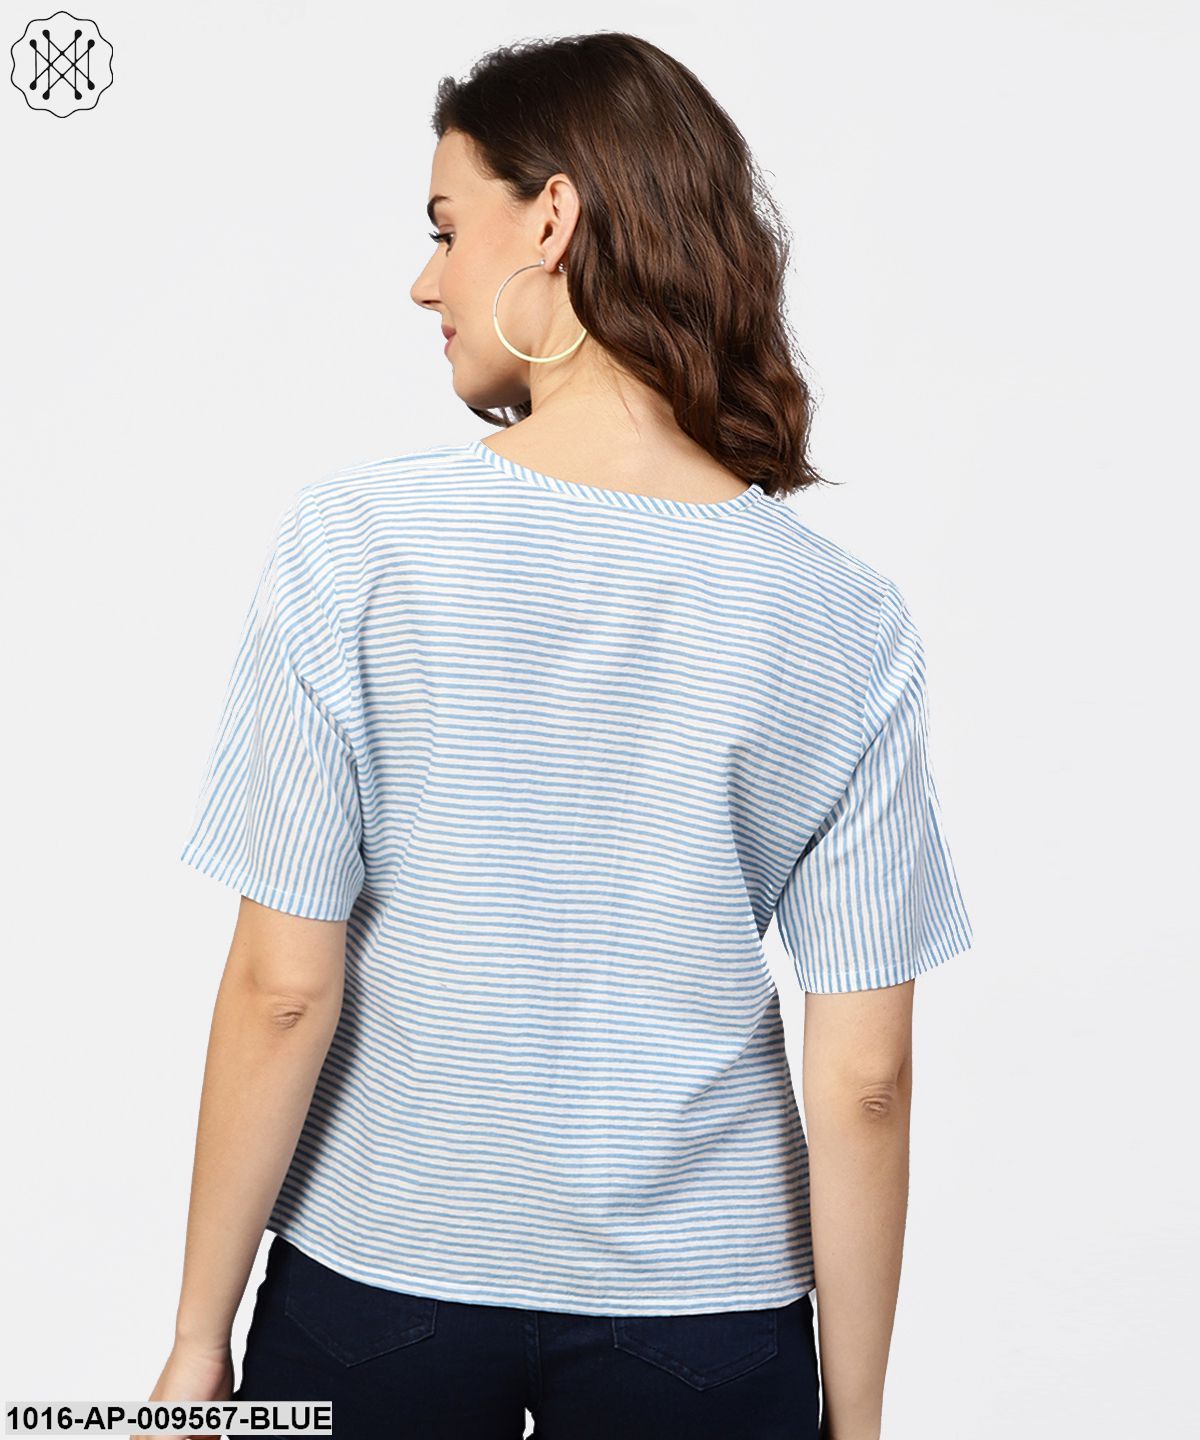 Blue Striped Short Sleeve Top With Round Neck